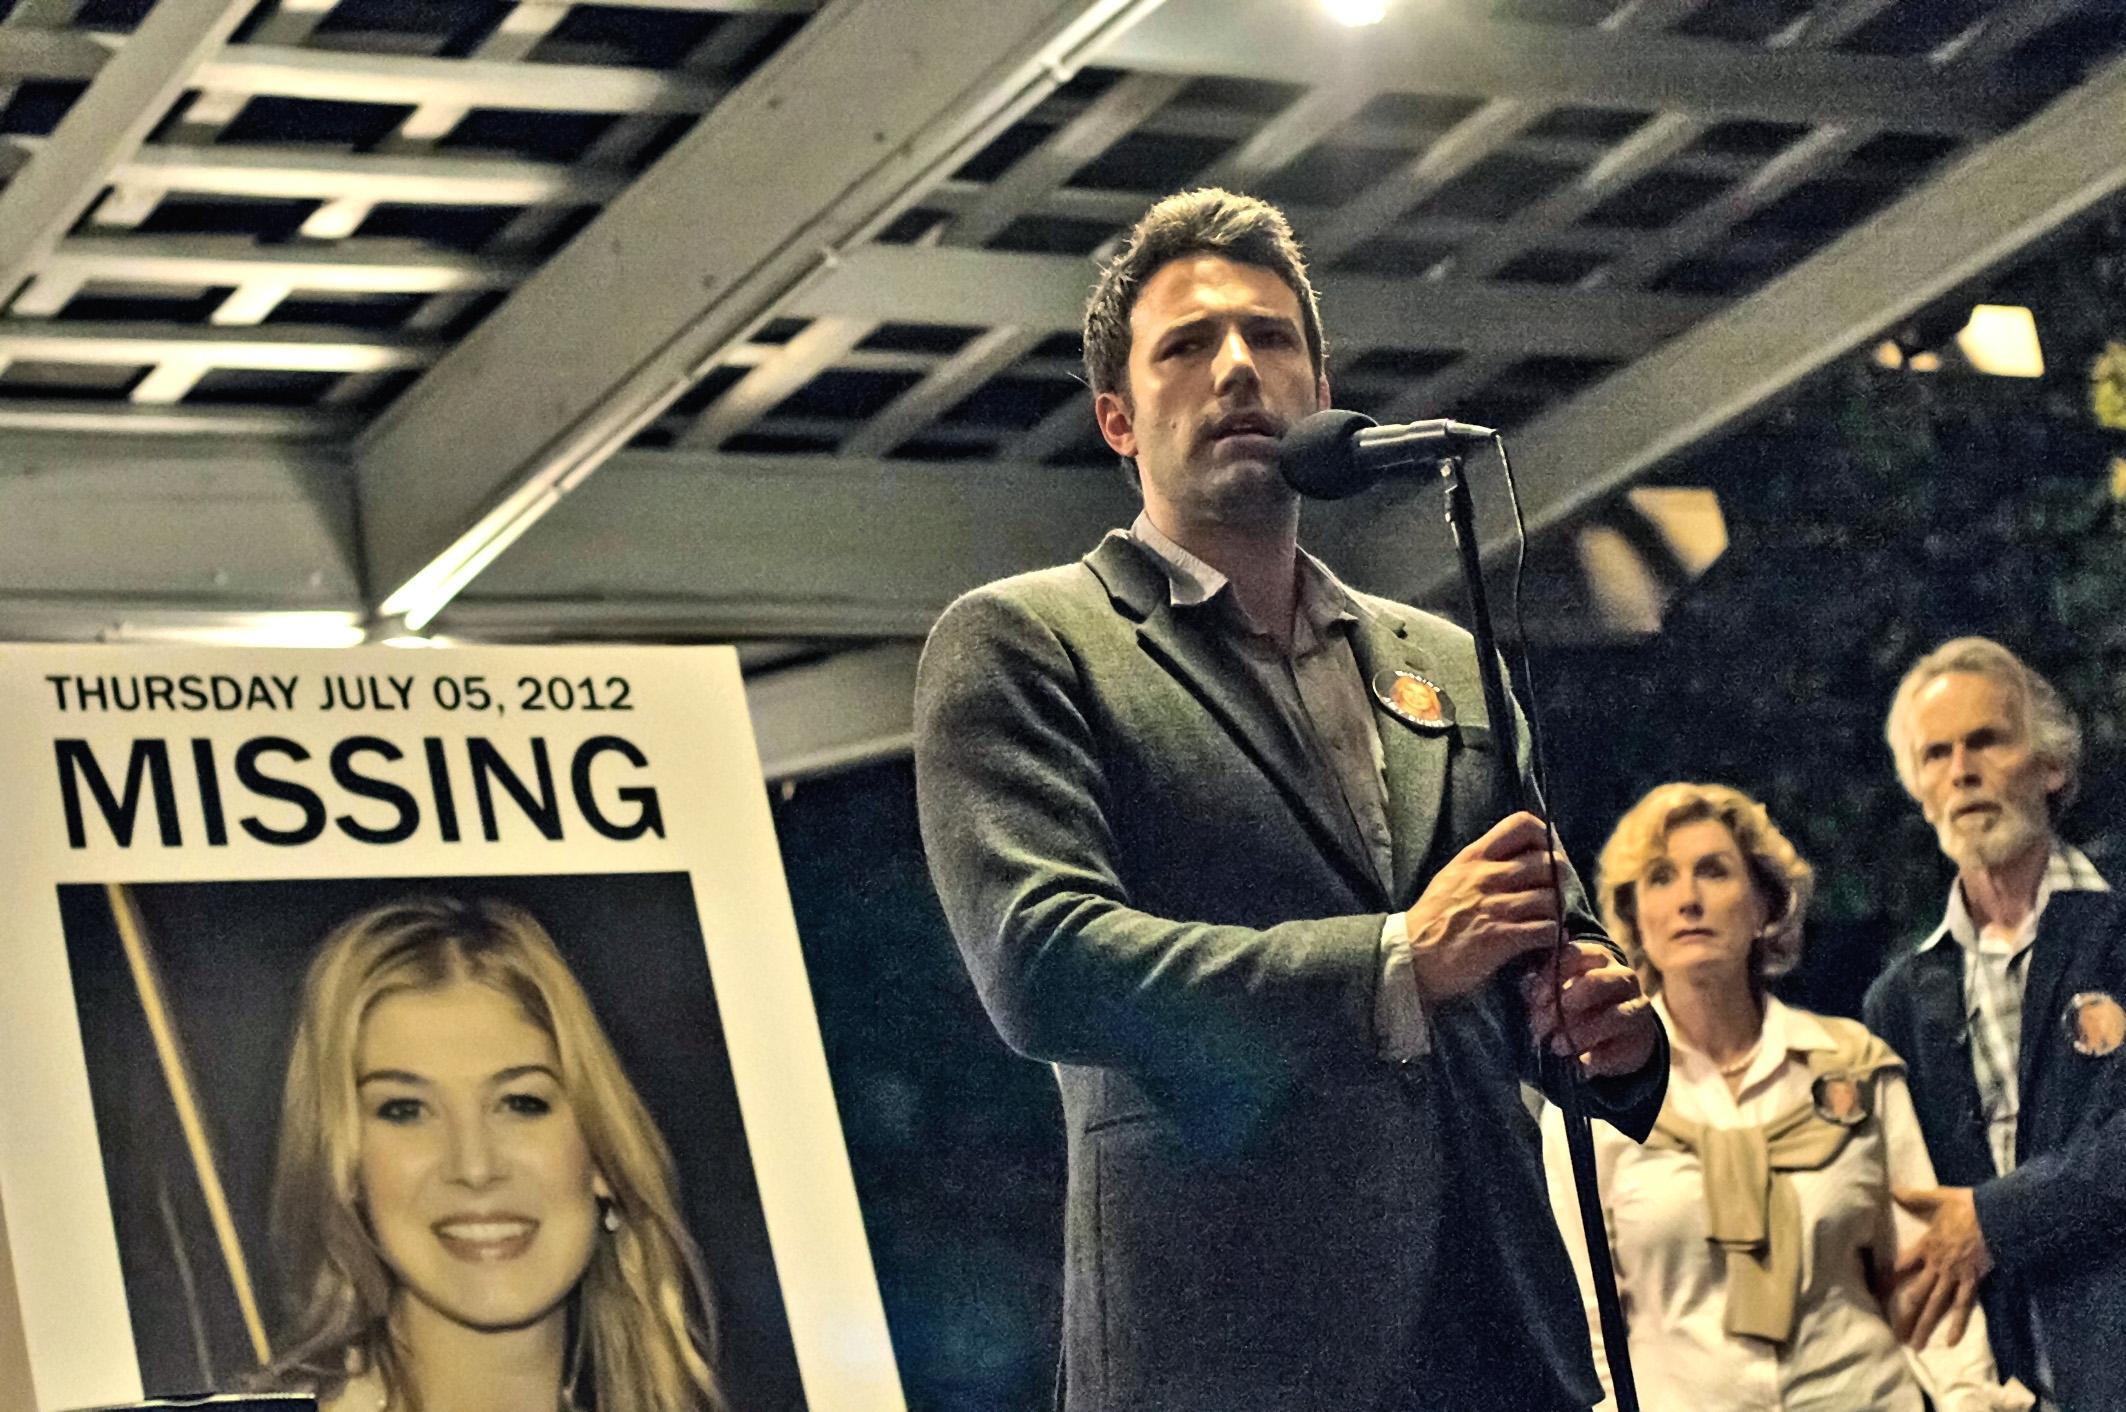 Image du film Gone Girl 872b6928-32a5-4700-bbfb-3aa350227a8c